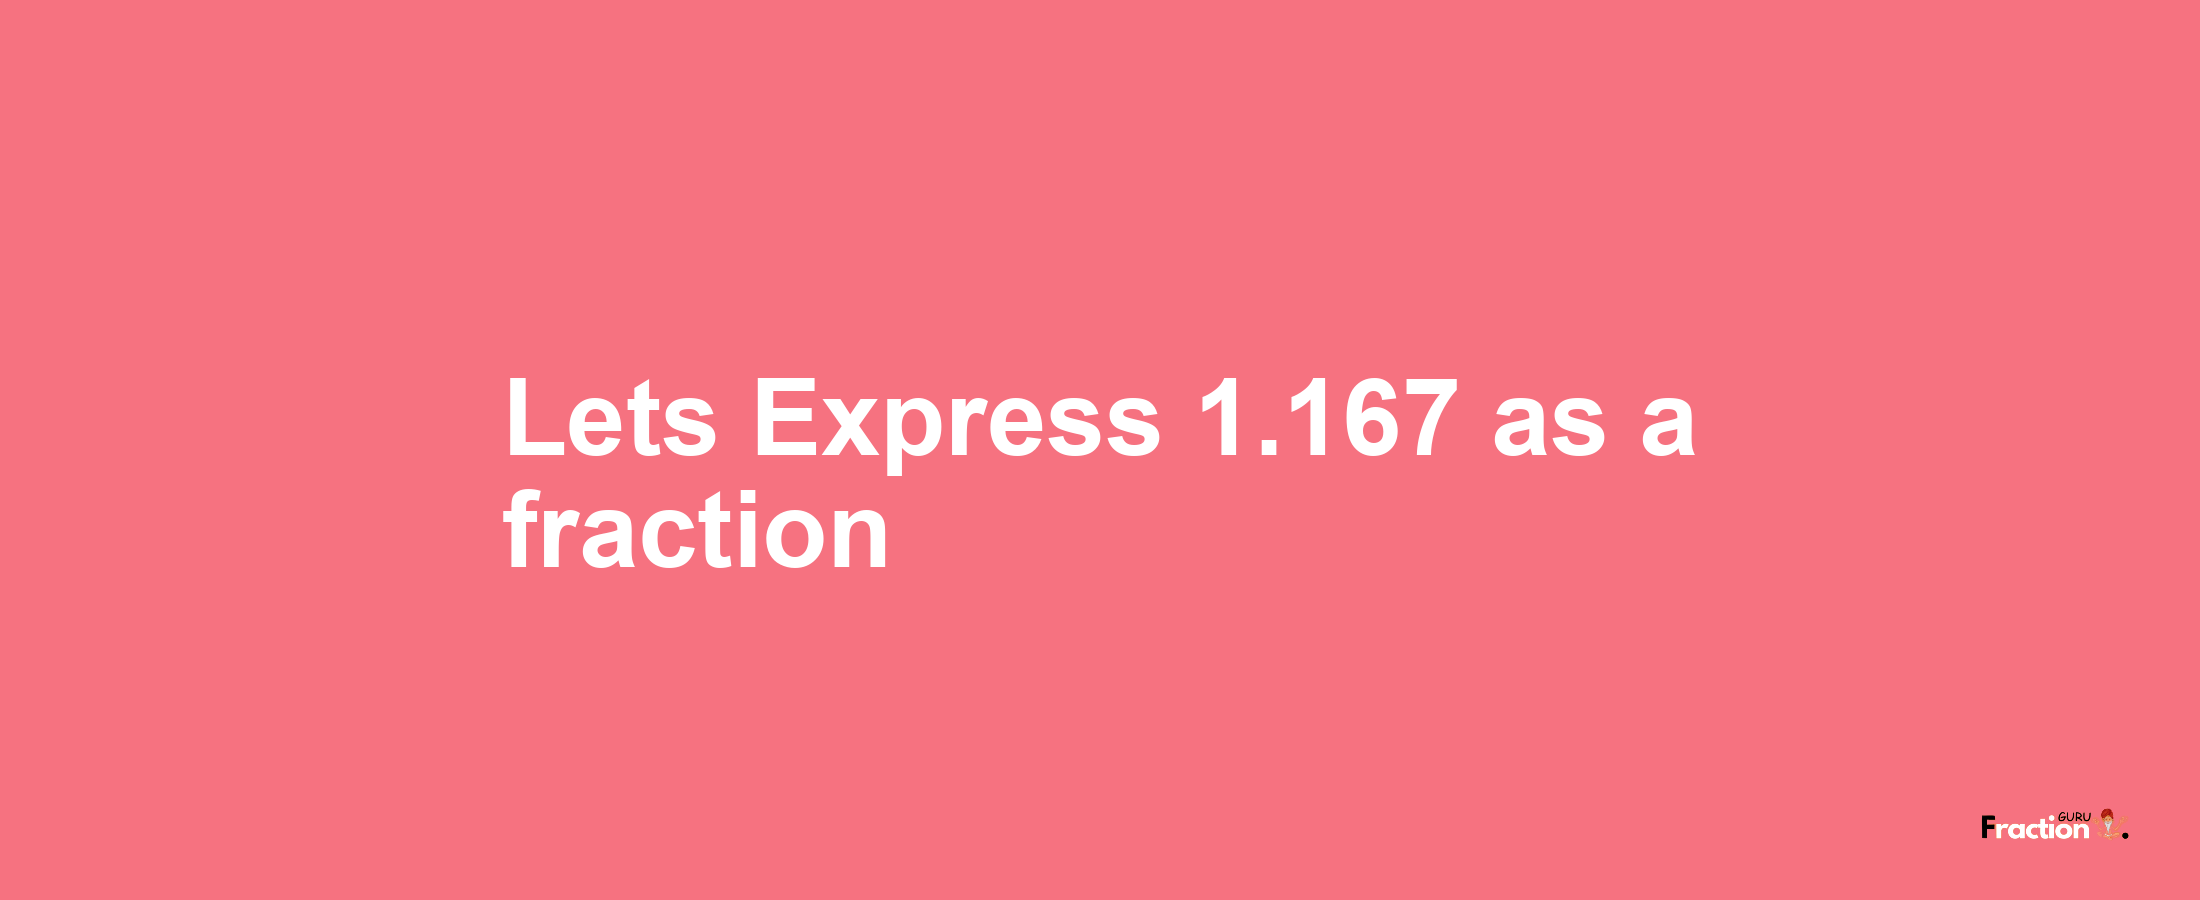 Lets Express 1.167 as afraction